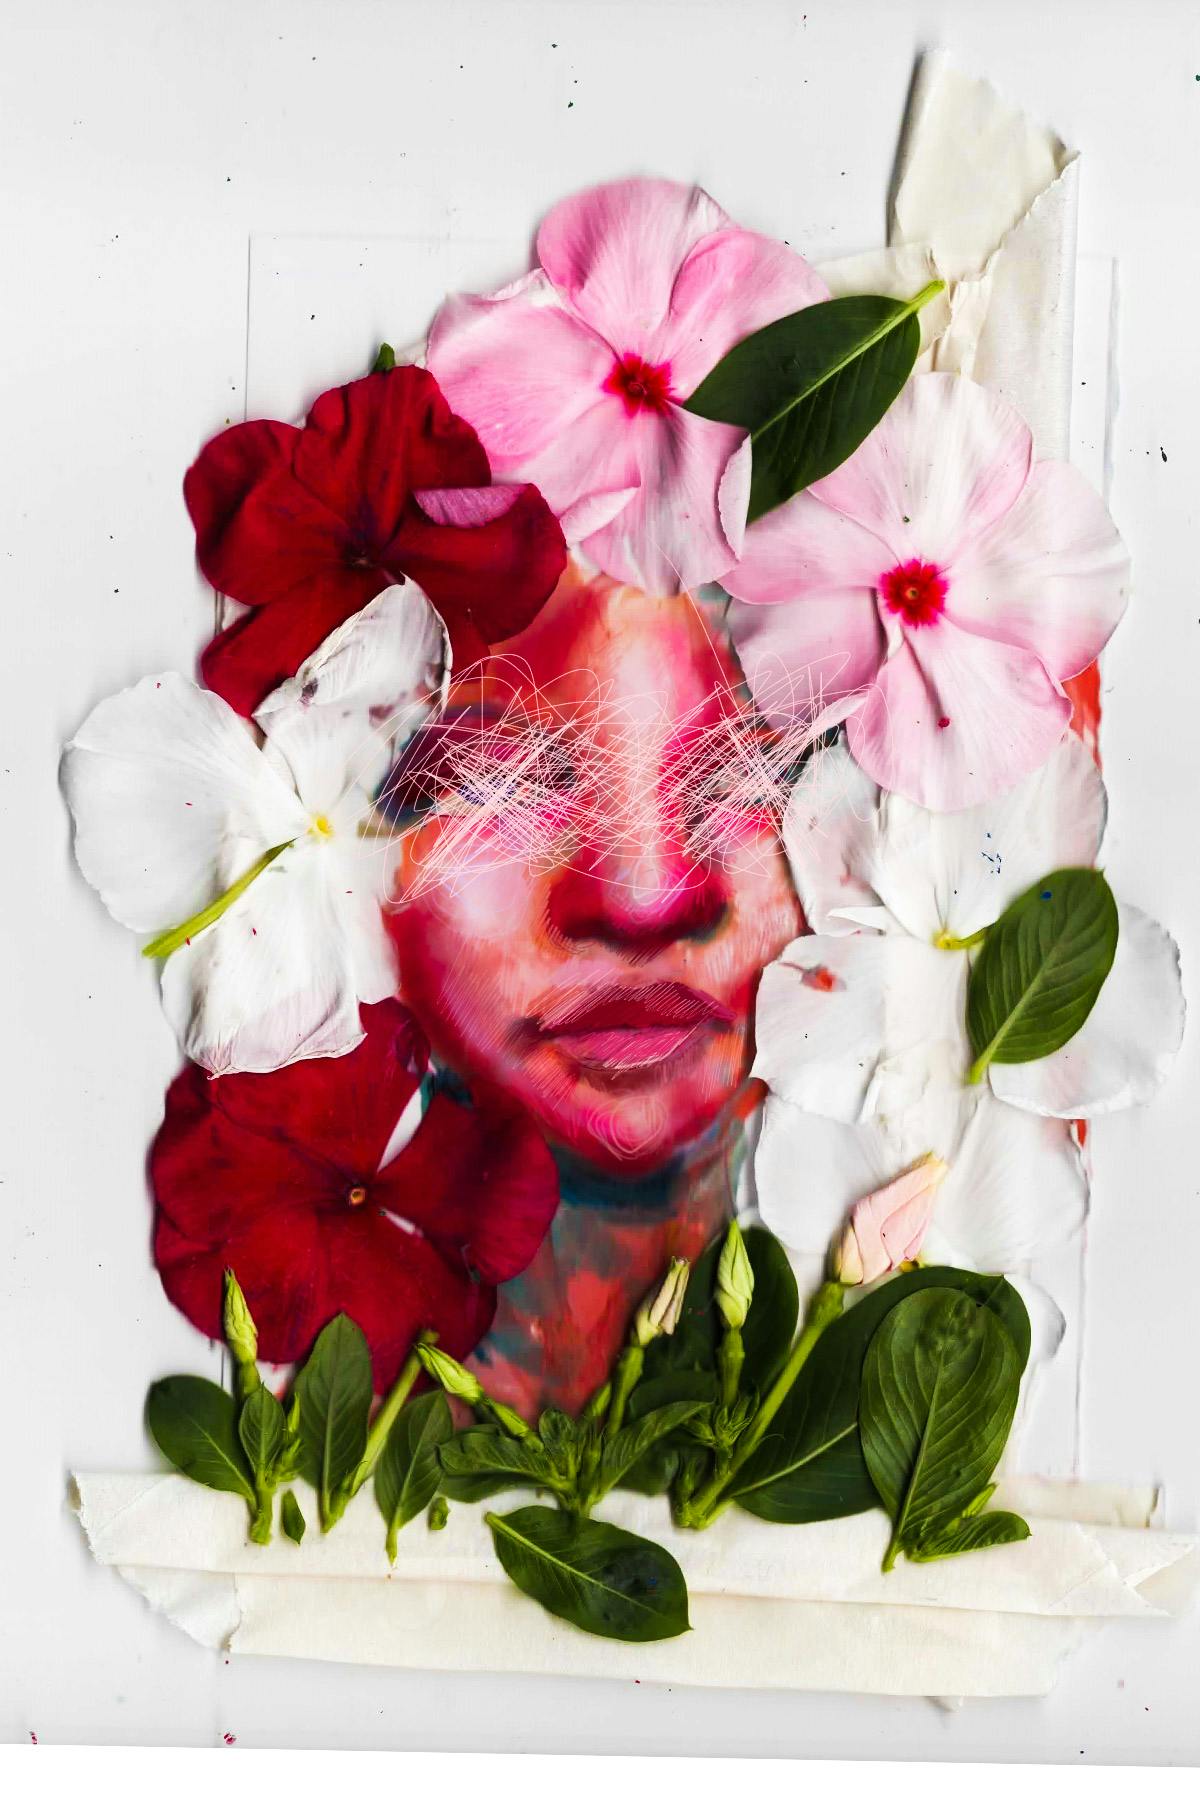 Mixed media with flowers